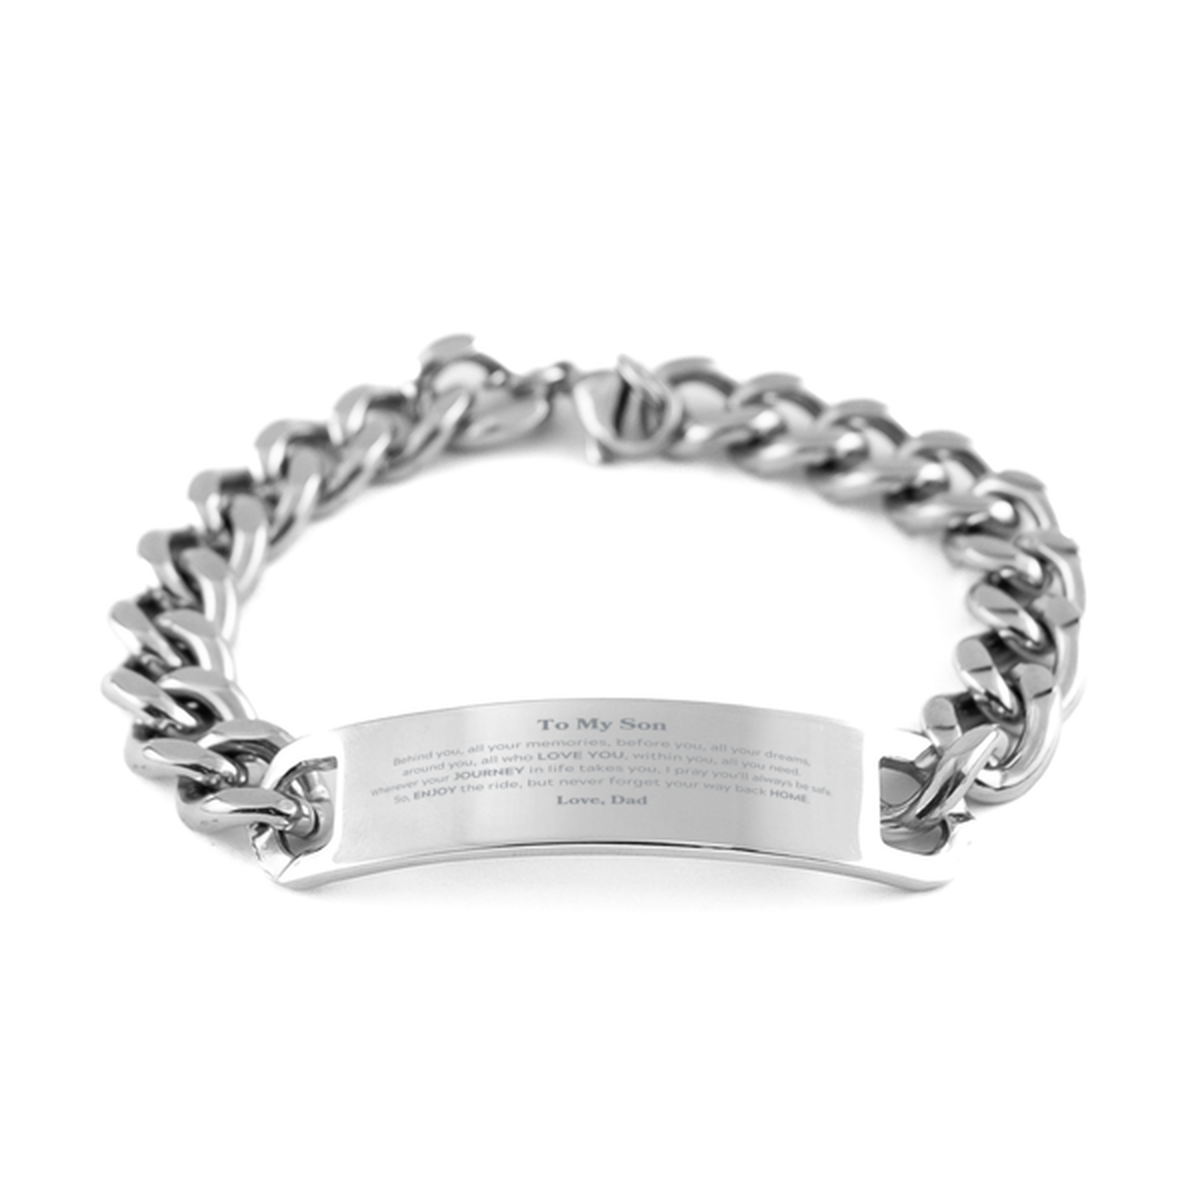 To My Son Graduation Gifts from Dad, Son Cuban Chain Stainless Steel Bracelet Christmas Birthday Gifts for Son Behind you, all your memories, before you, all your dreams. Love, Dad